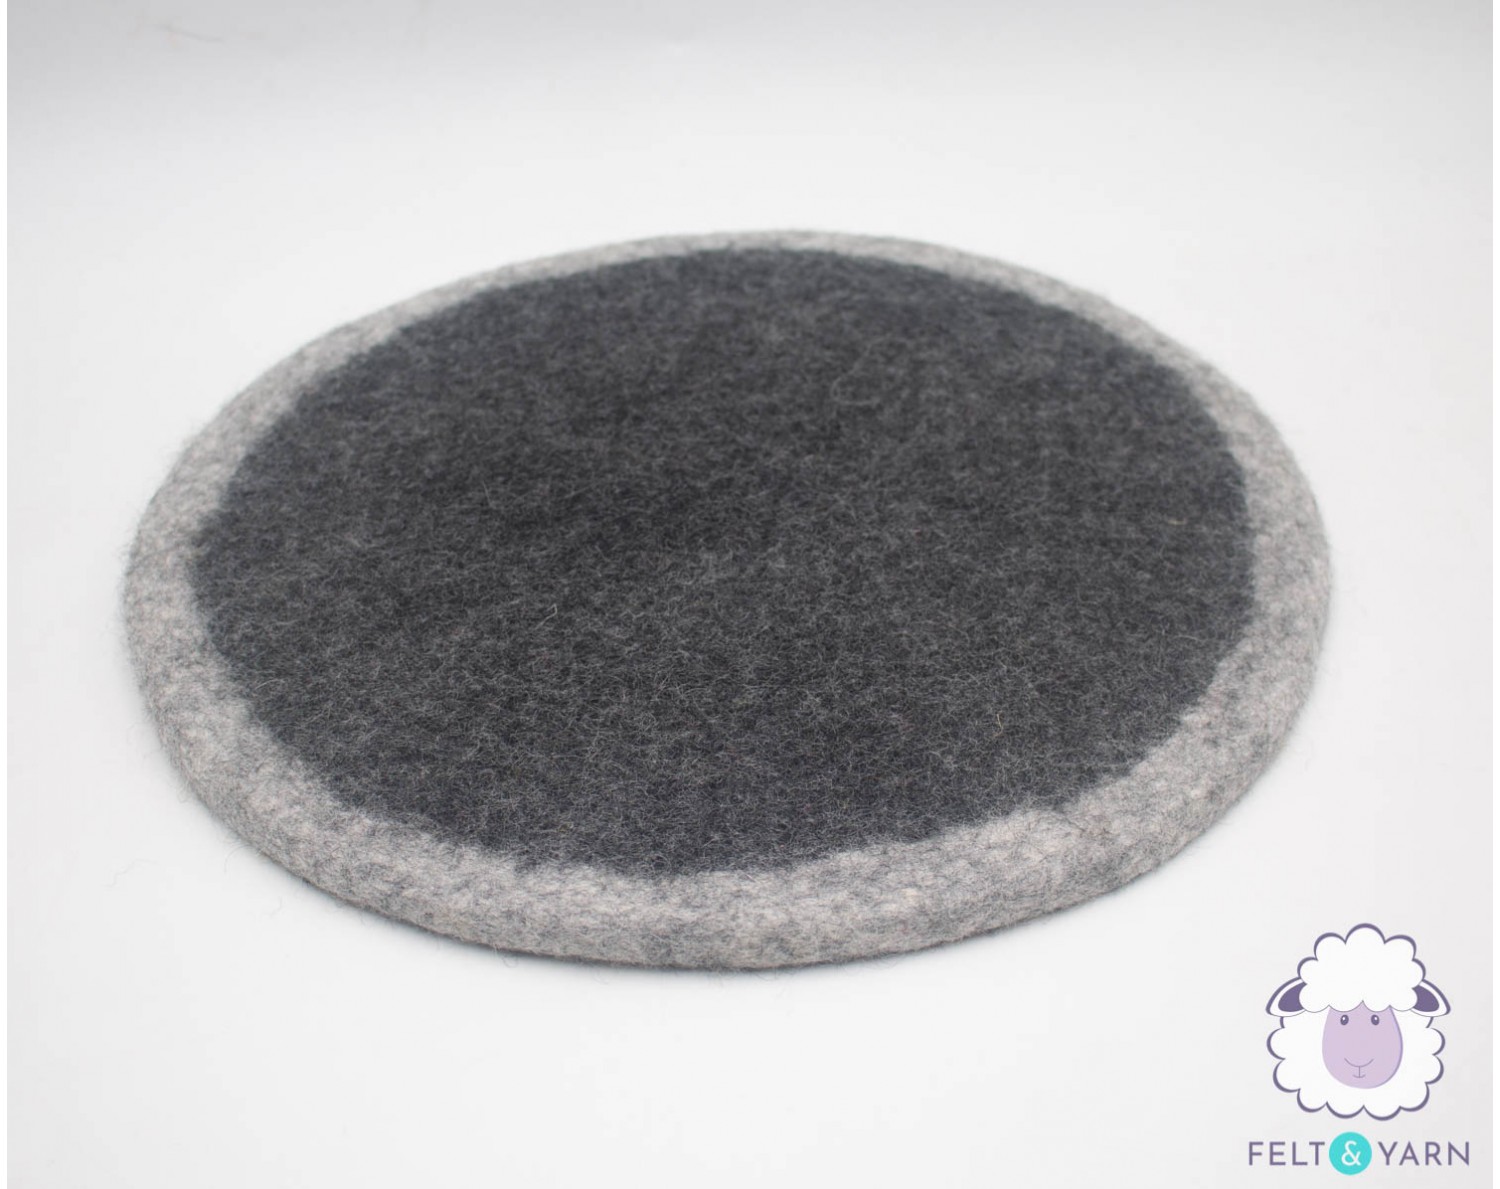 35cm Wool Felted Seat Pad, Round Thick Chair Cushion for Felt Home Decor,  Start With 2 Sets of Handmade Pads 